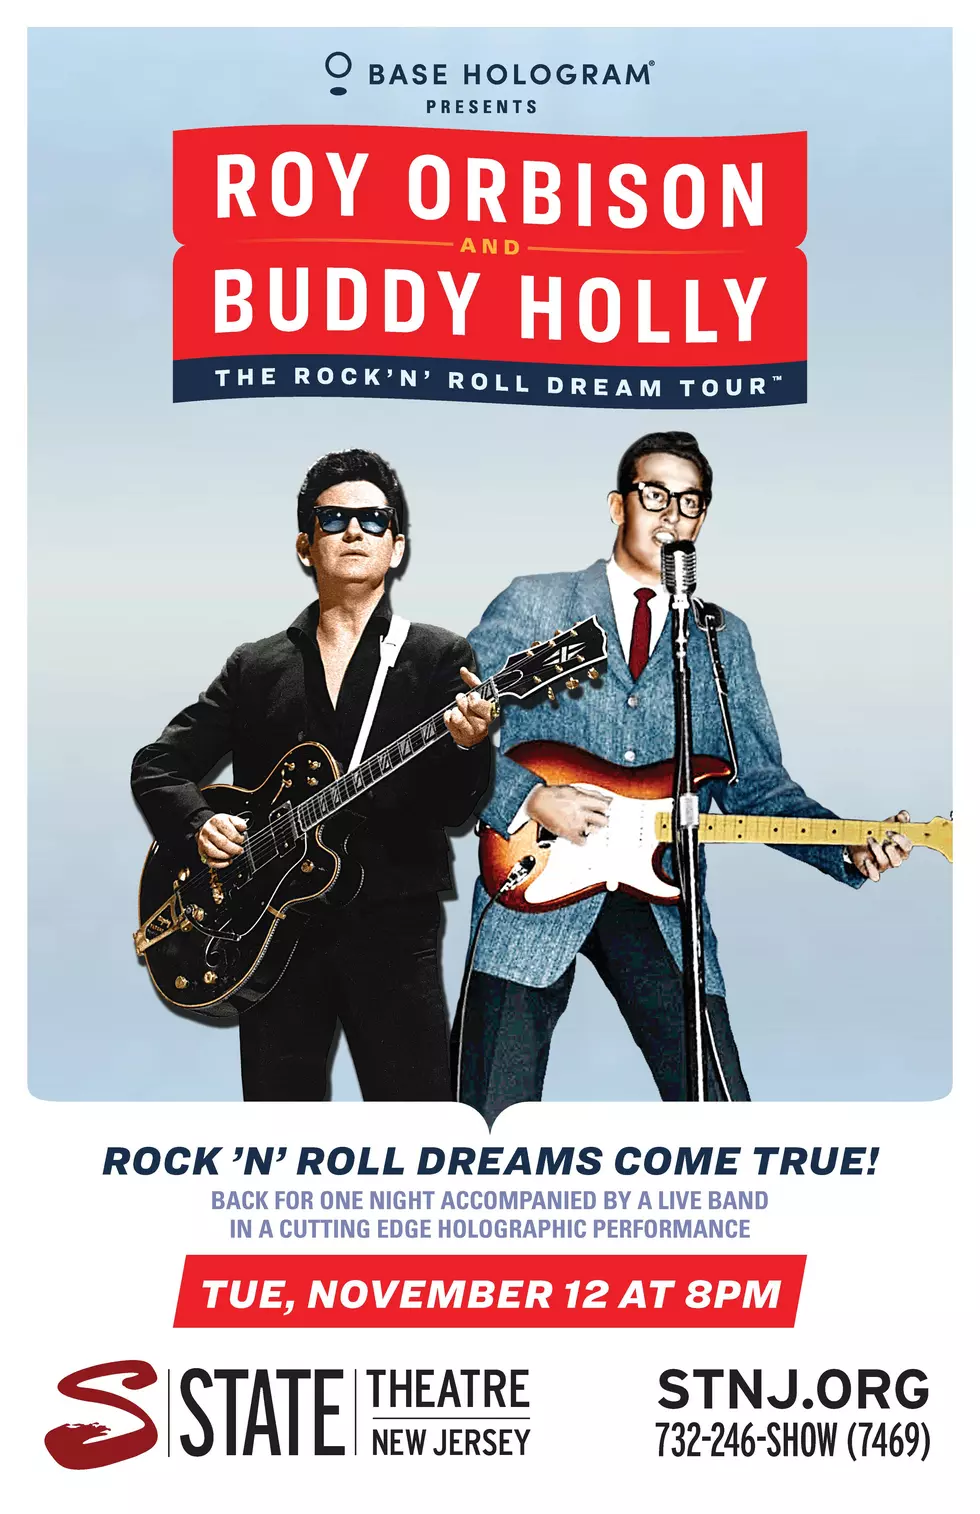 Roy Orbison-Buddy Holly hologram show comes to New Jersey